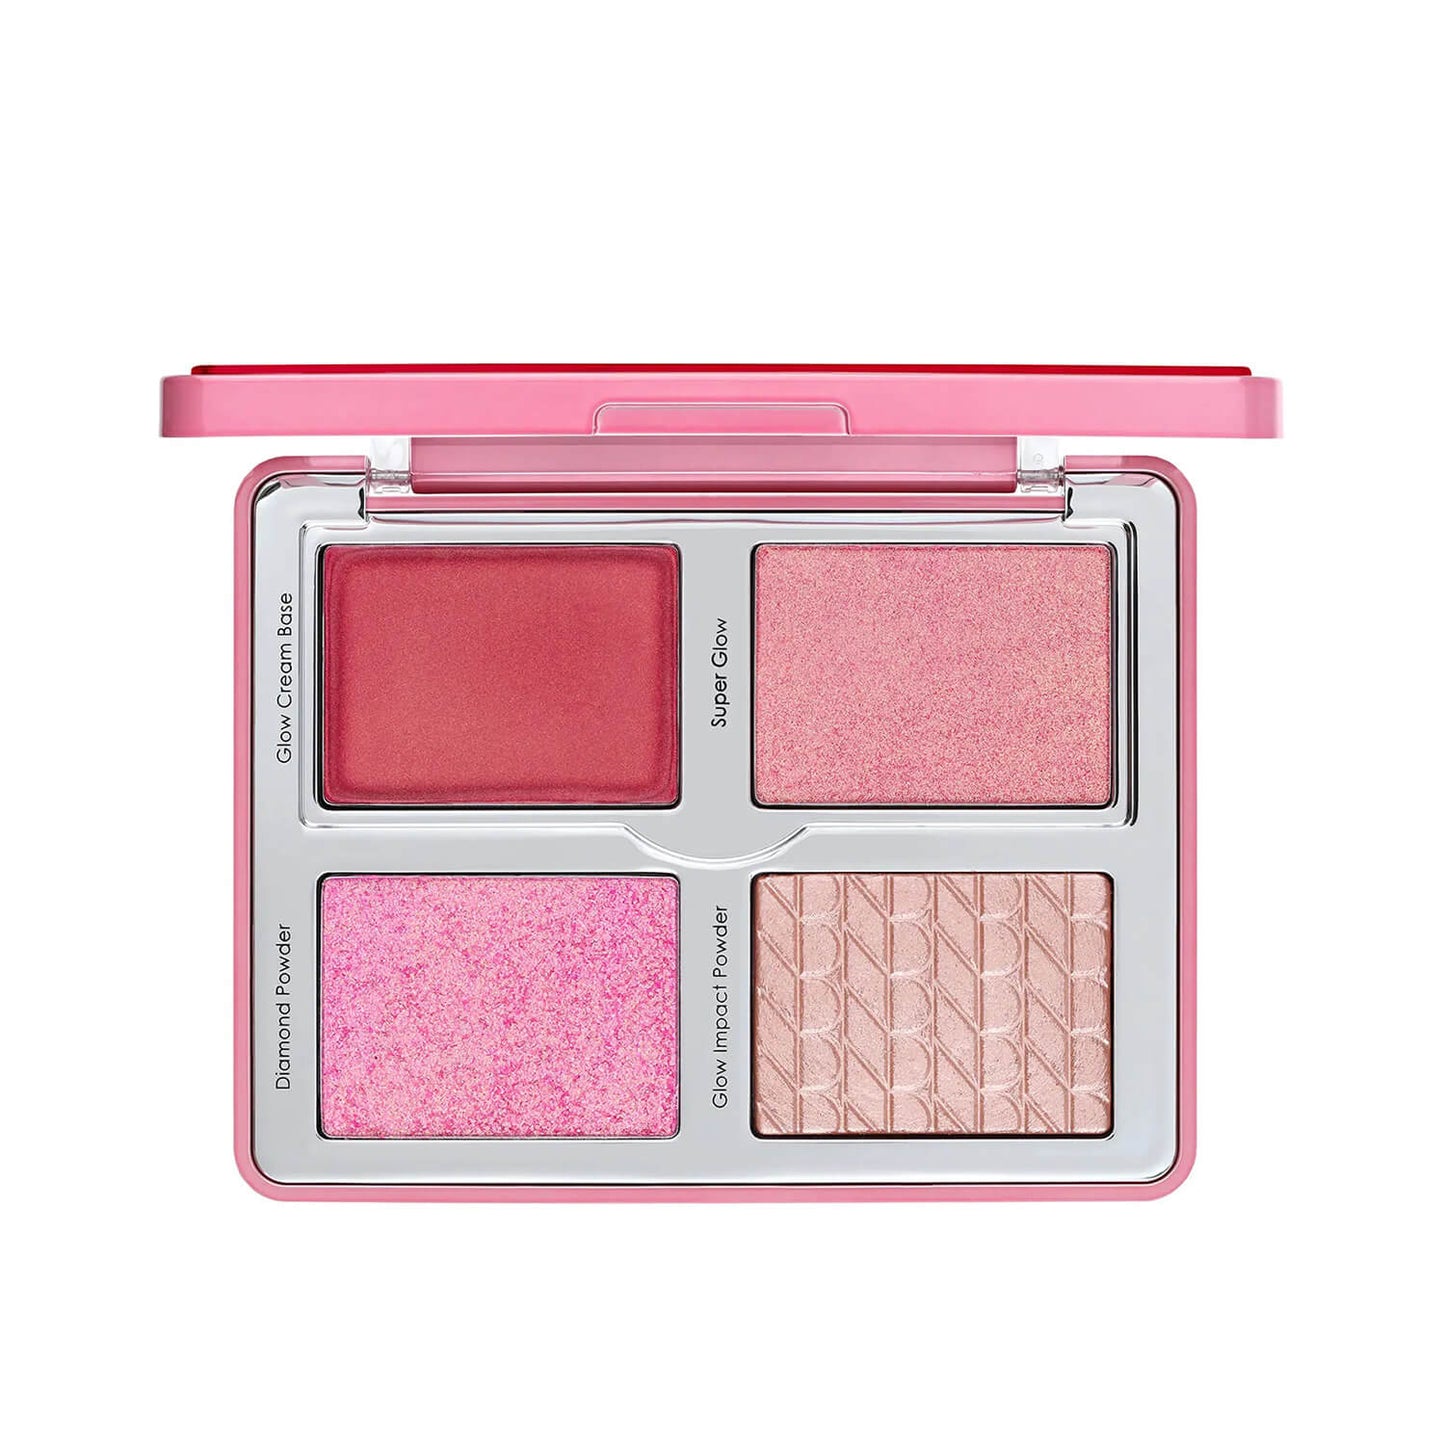 Shop Natasha Denona Love Glow cheek Palette available at Heygirl.pk for delivery in Pakistan